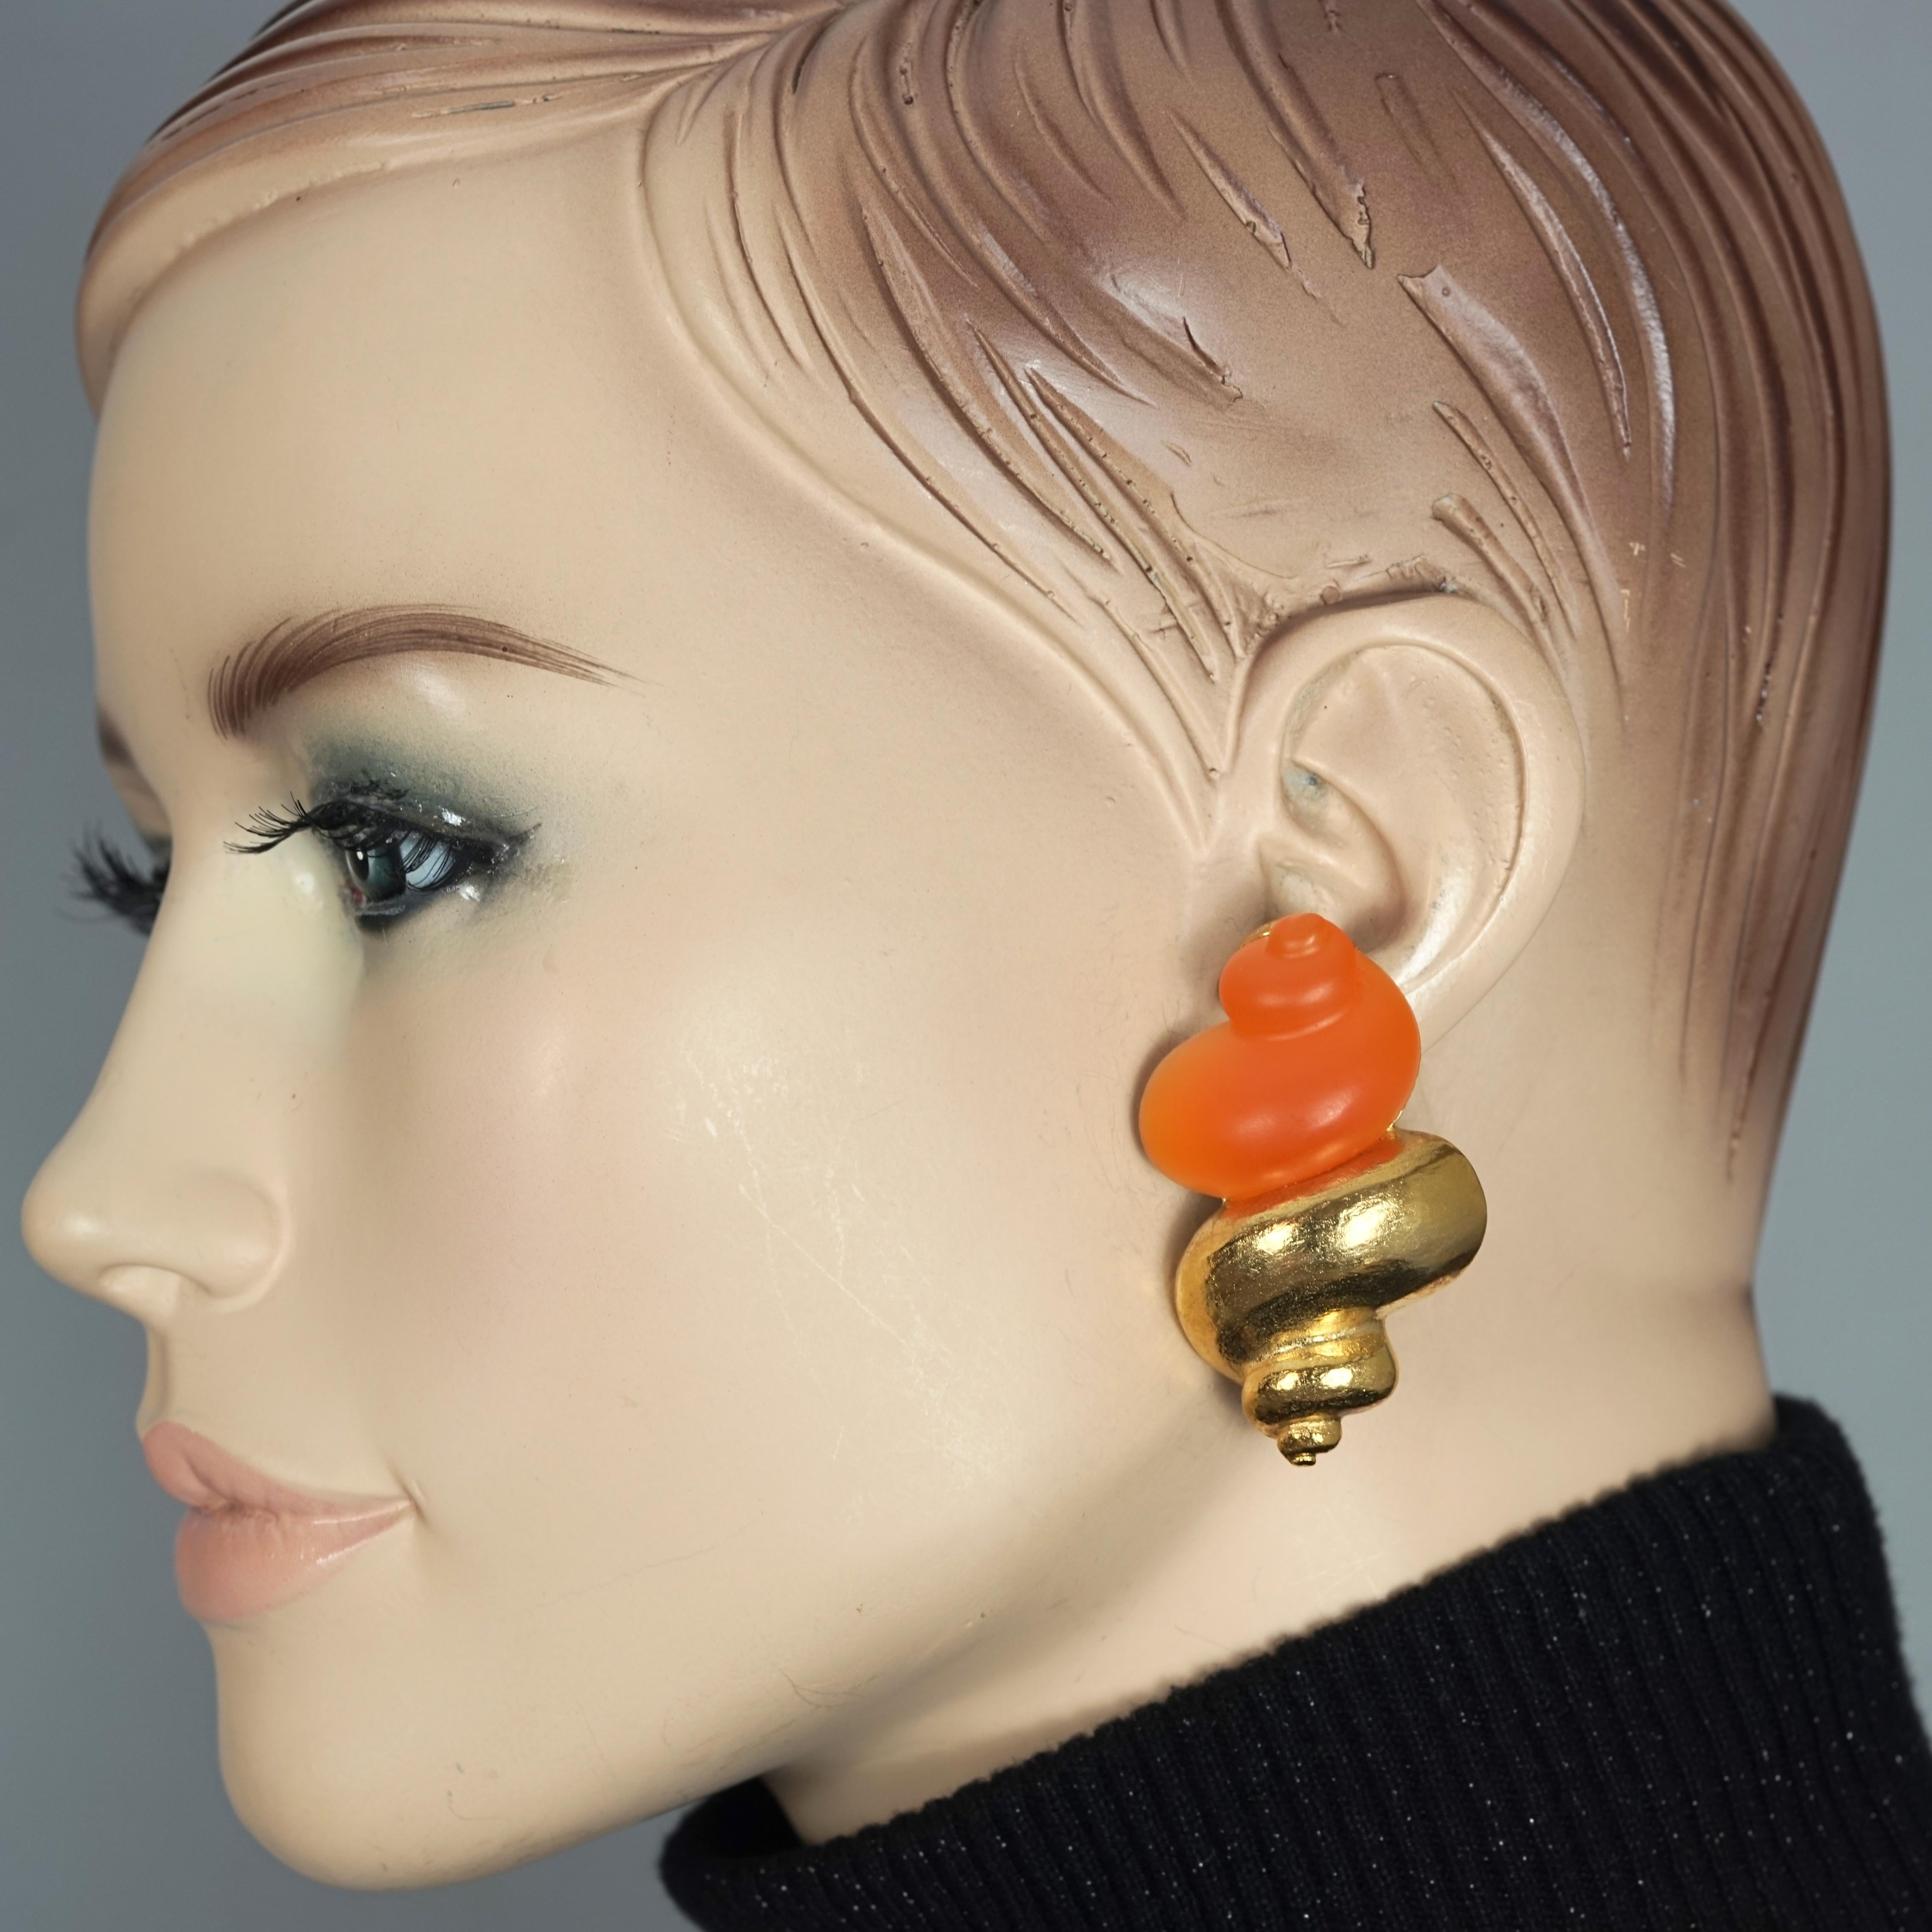 Vintage CHRISTIAN DIOR DUNE by Robert Goossens Shell Earrings
Limited edition Christian Dior earrings designed by Robert Goossens for the perfume DUNE in 1987. 

Measurements:
Height: 2.04 inches (5.2 cm)
Width: 1.25 inches (3.2 cm)
Weight per